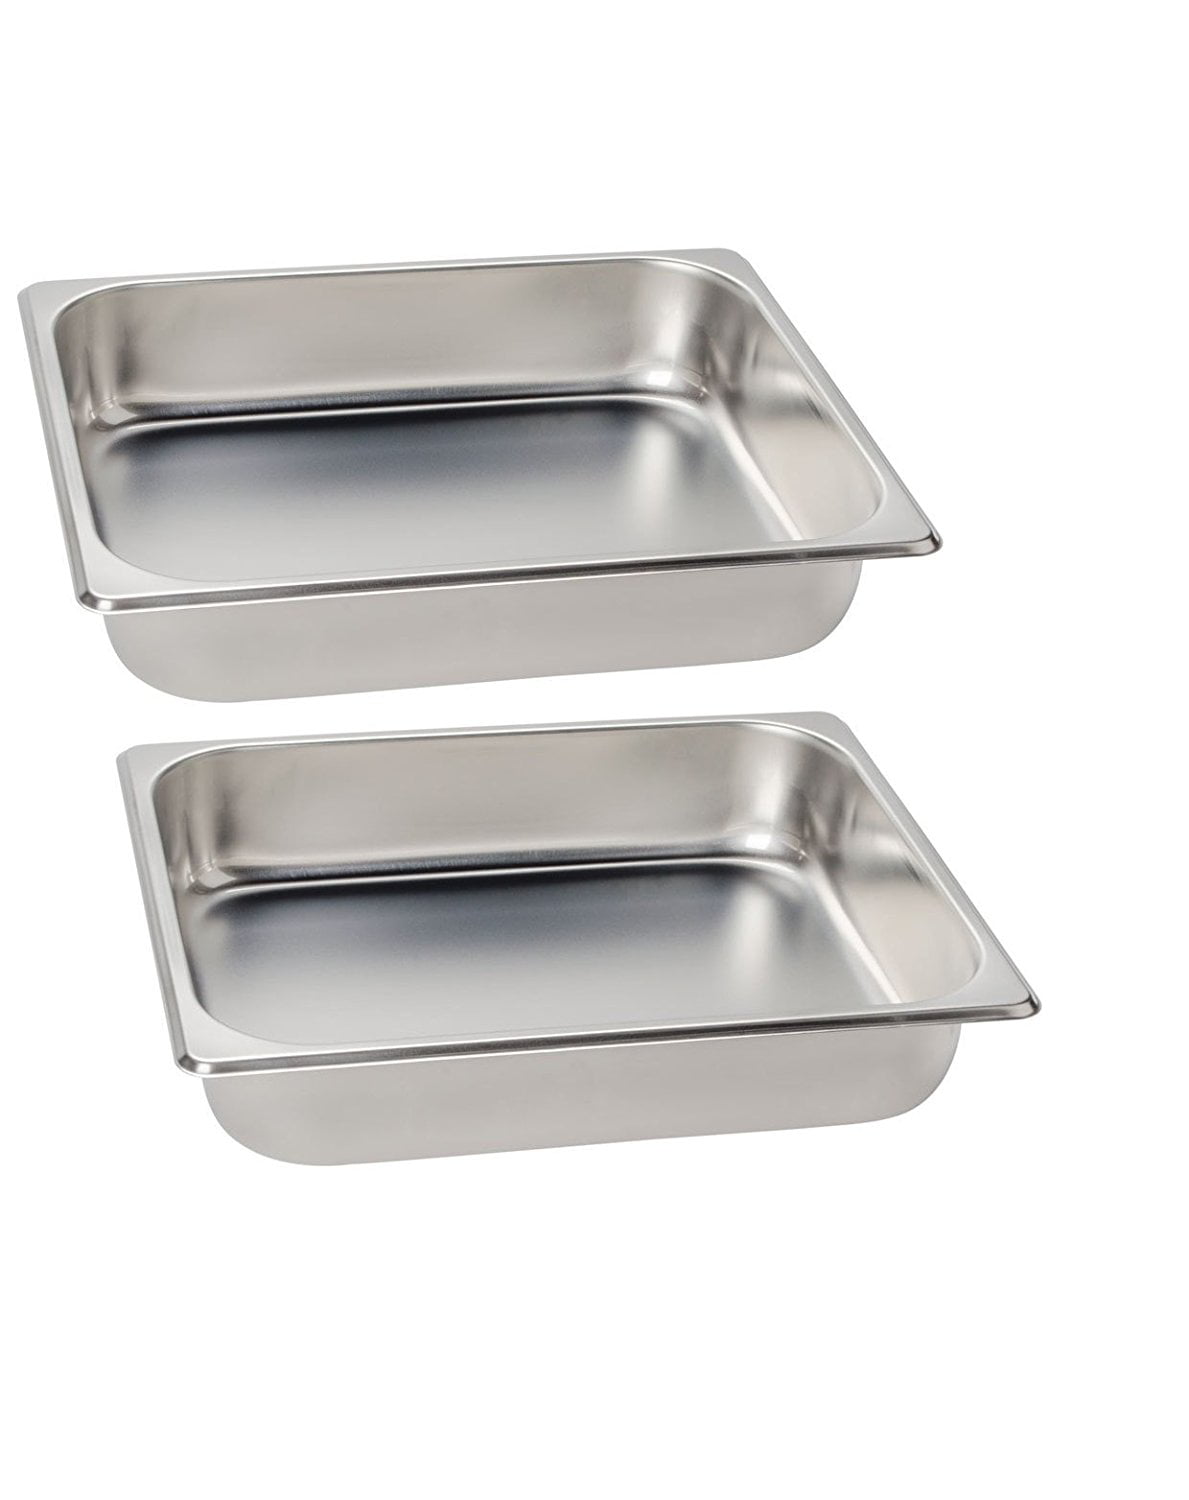 6 PACK Full Size 2 1/2" Deep Stainless Steel Steam Table Hotel Buffet Food Pan 